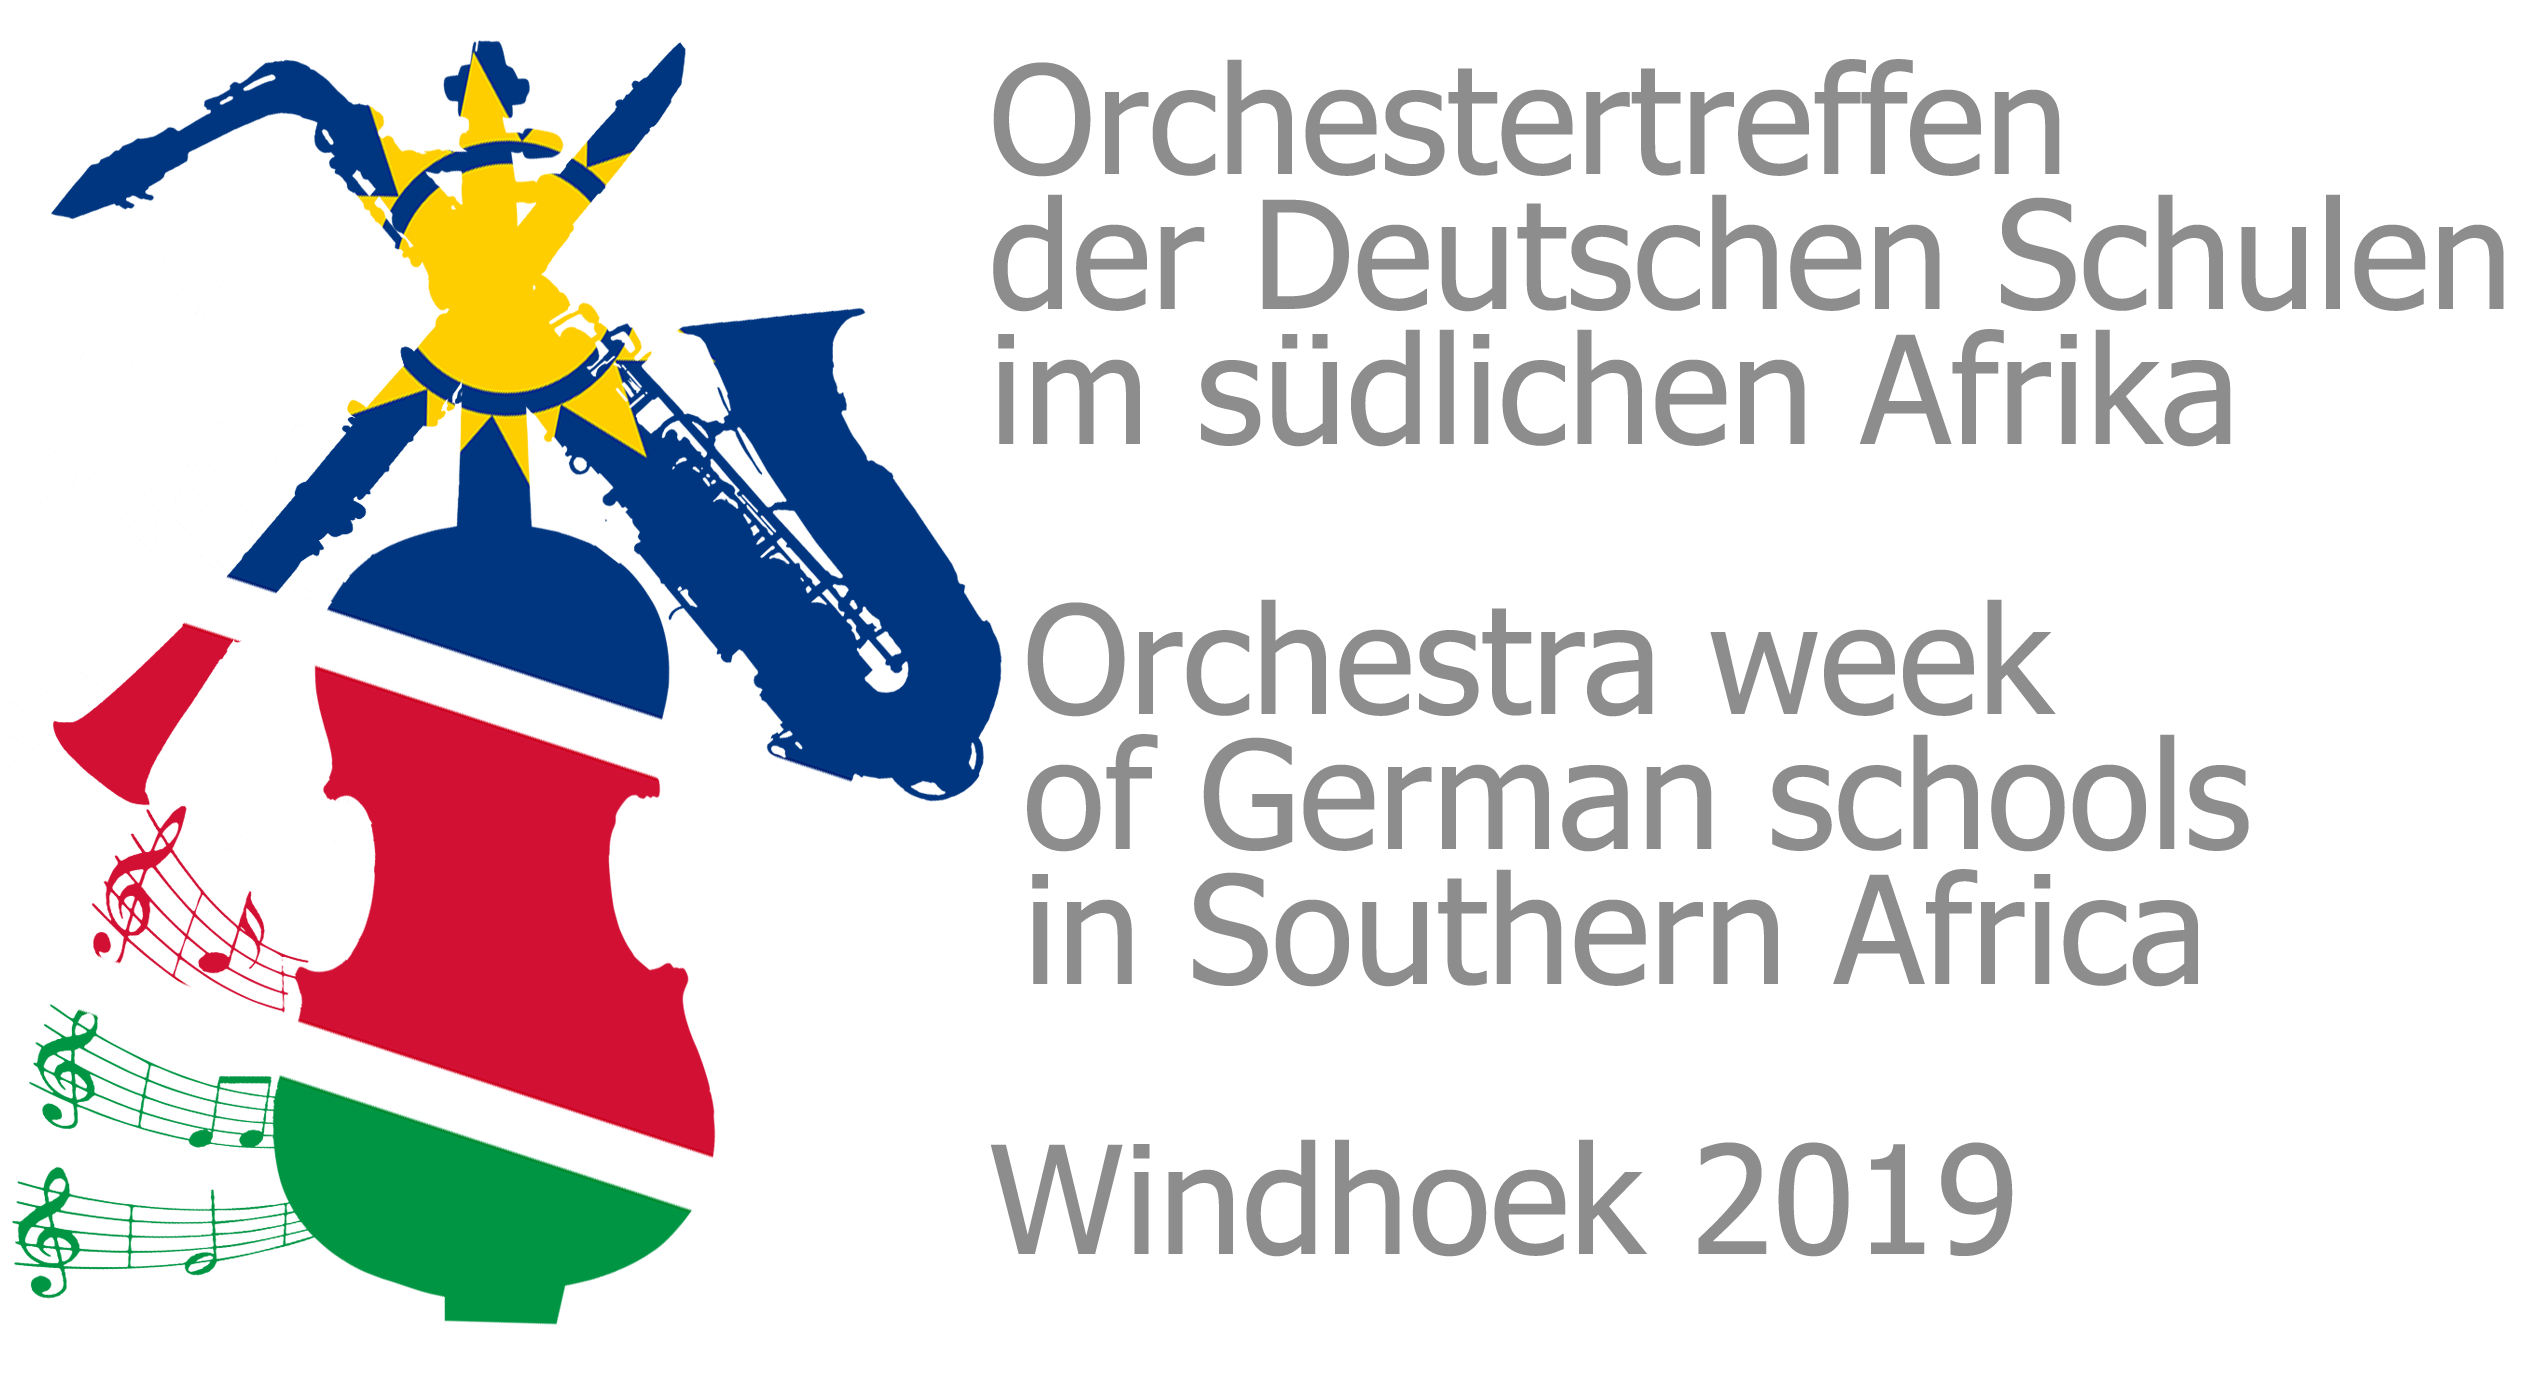 Orchestra week of German schools in Southern Africa